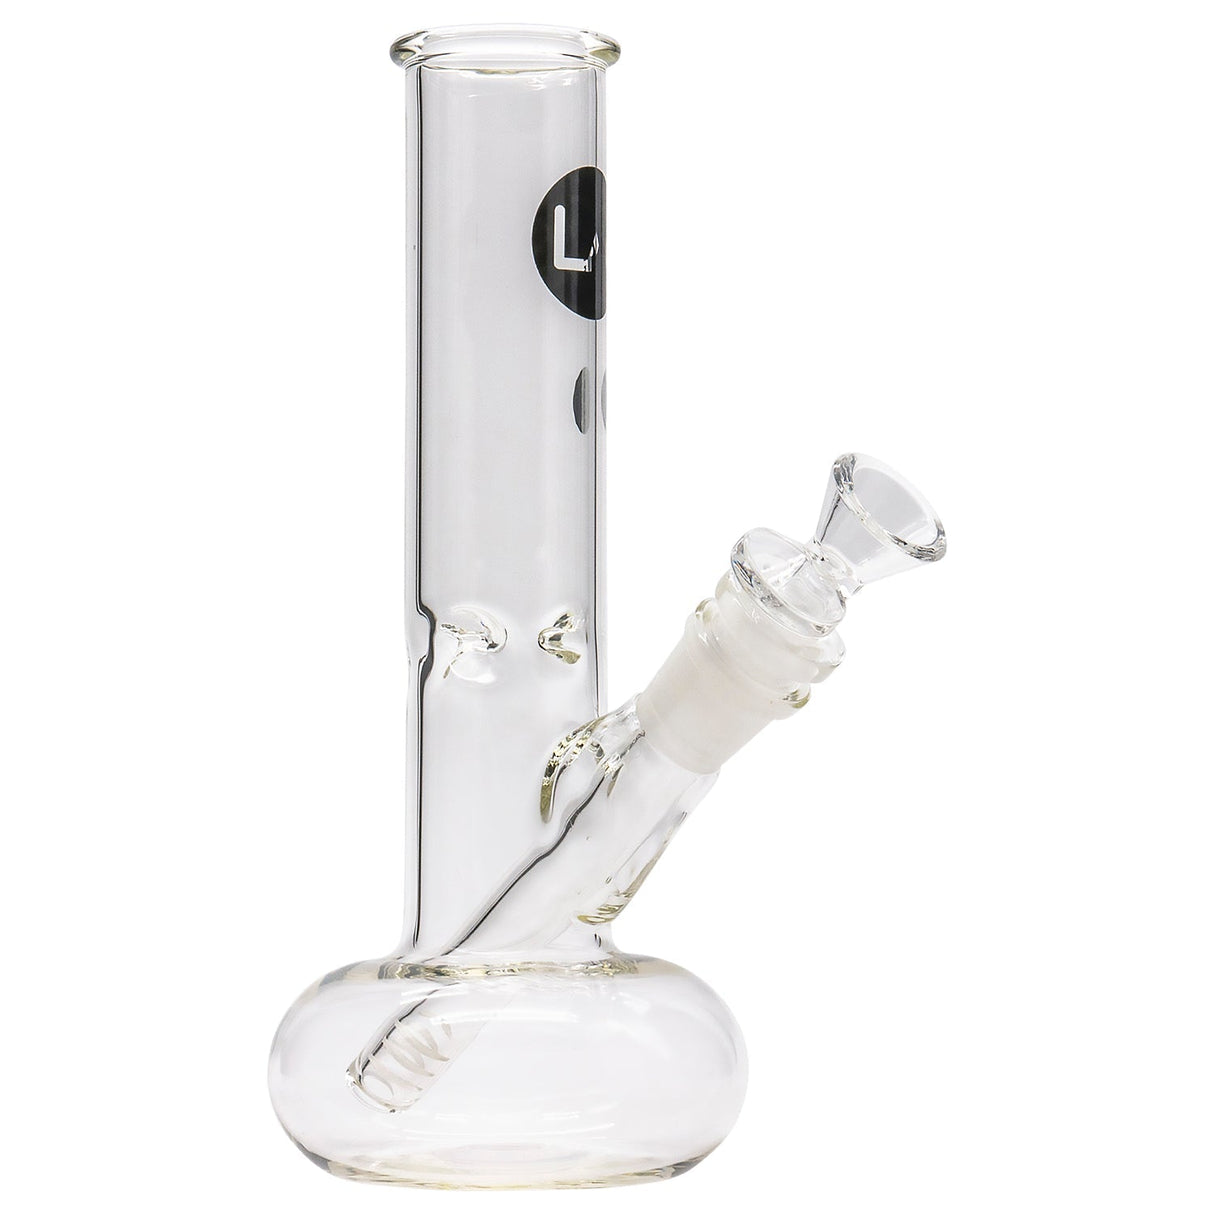 LA Pipes Donut Base Bong with 45 Degree Joint, 8" Tall Borosilicate Glass, Front View